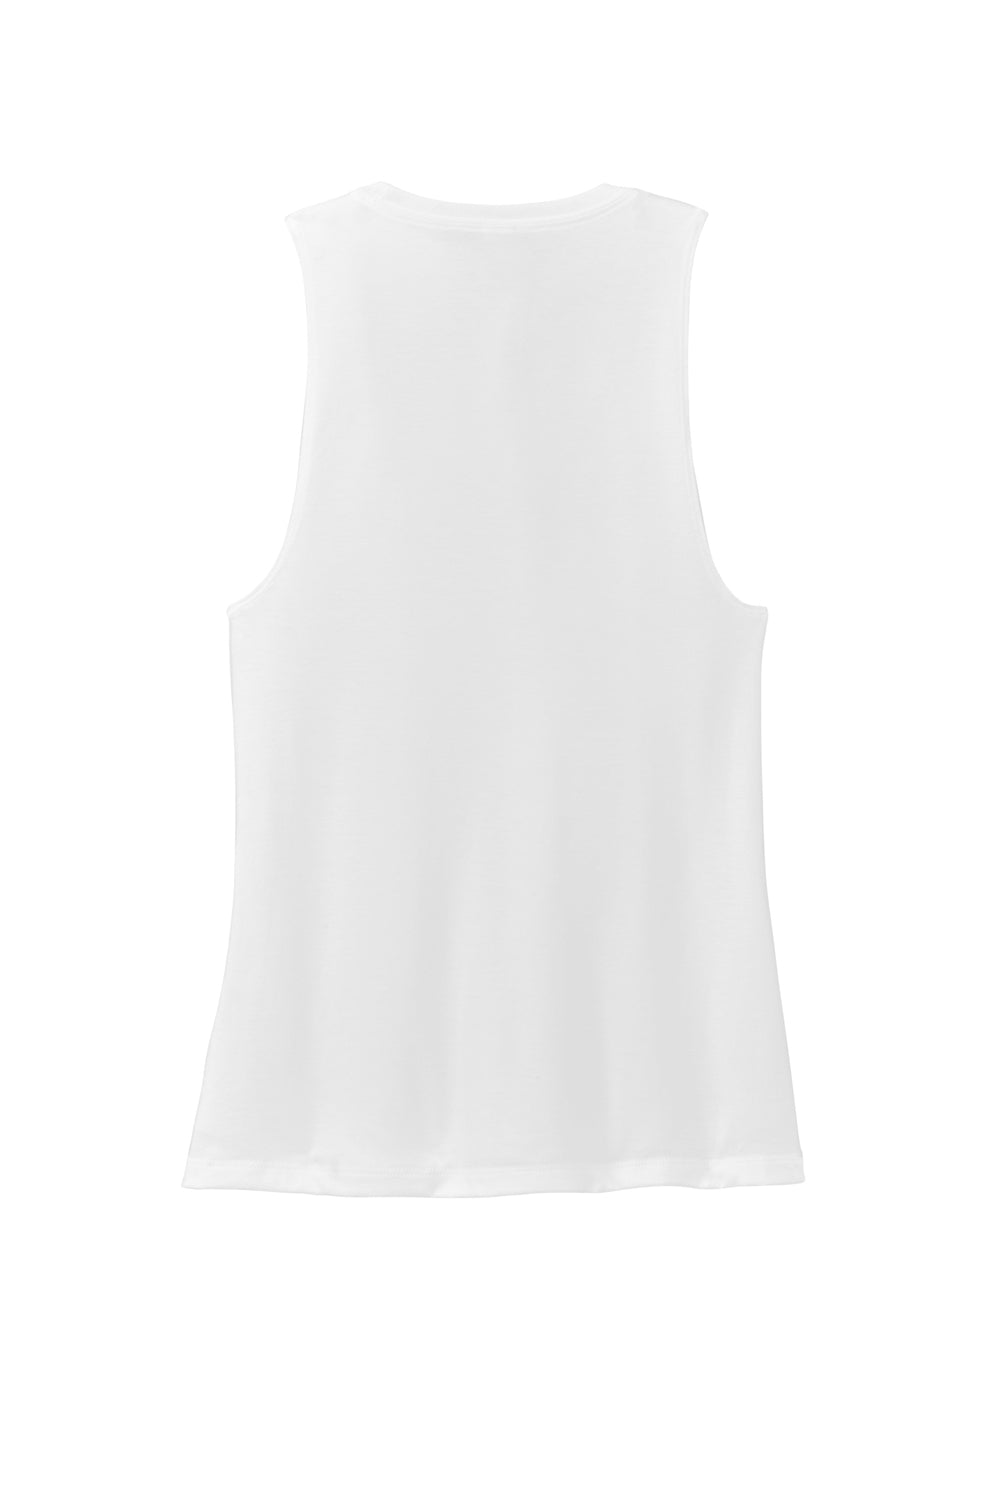 District DT153 Womens Perfect Tri Muscle Tank Top White Flat Back